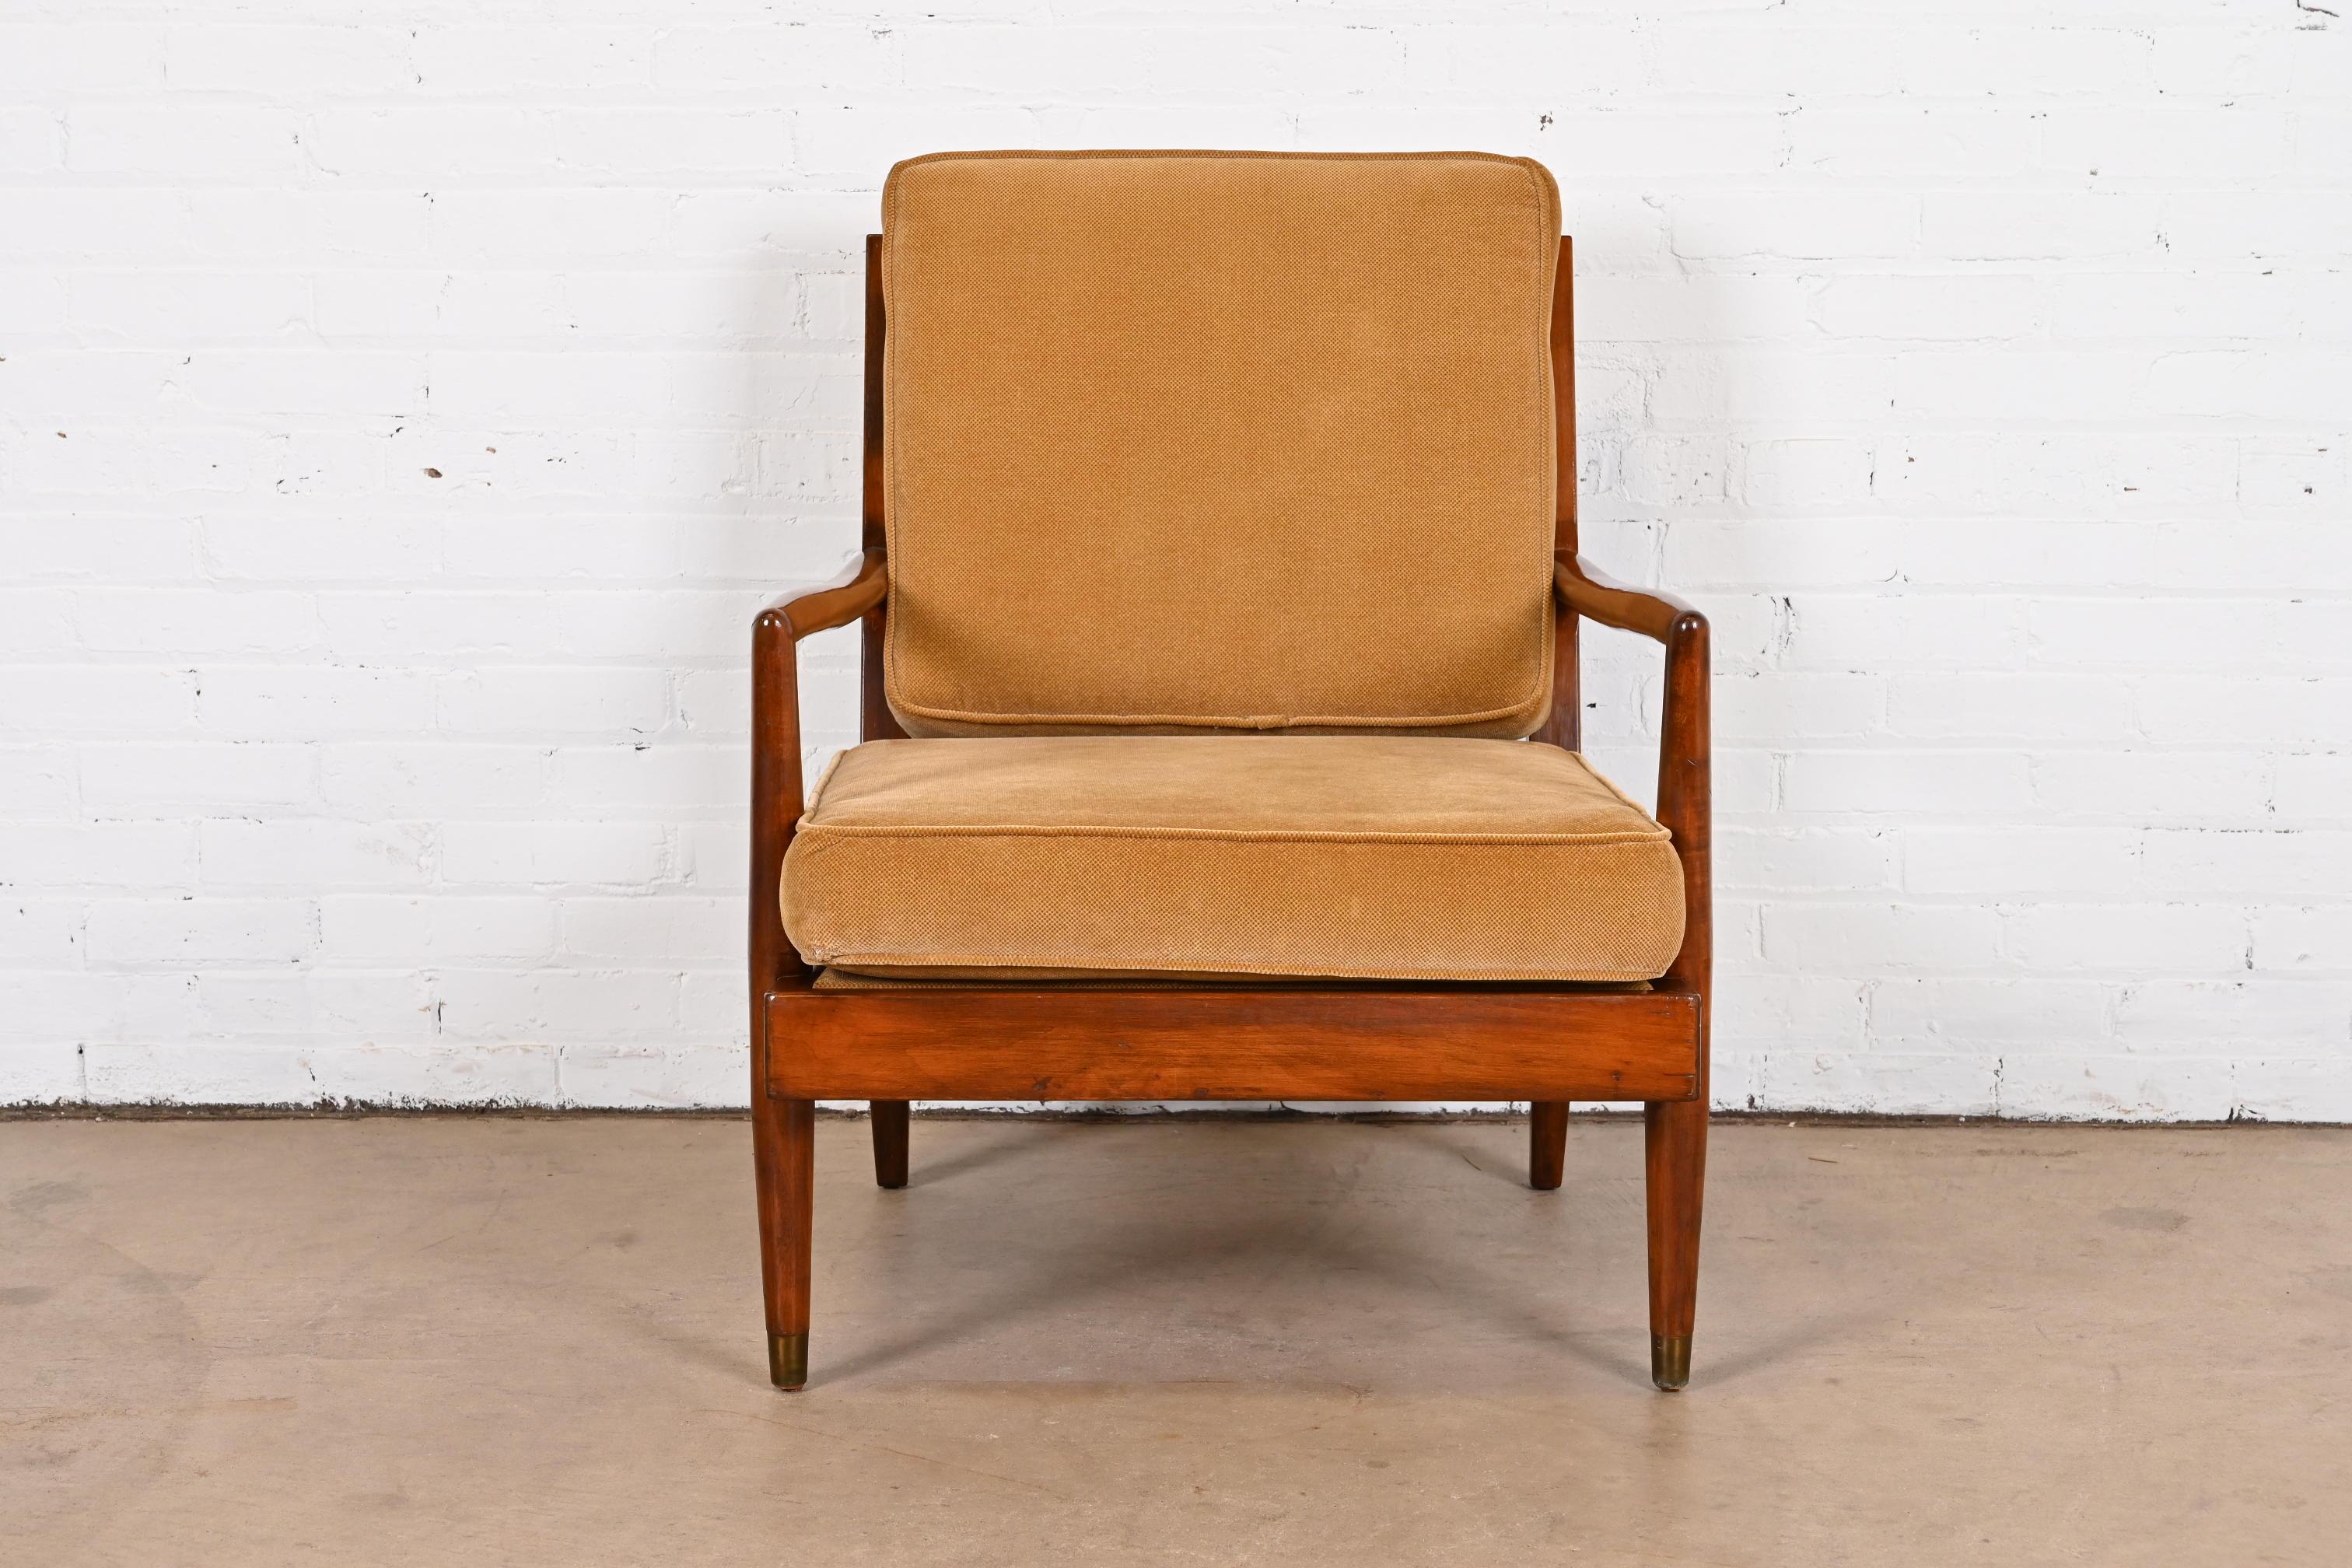 Robsjohn-Gibbings Style Mid-Century Modern Sculpted Walnut Lounge Chair In Good Condition For Sale In South Bend, IN